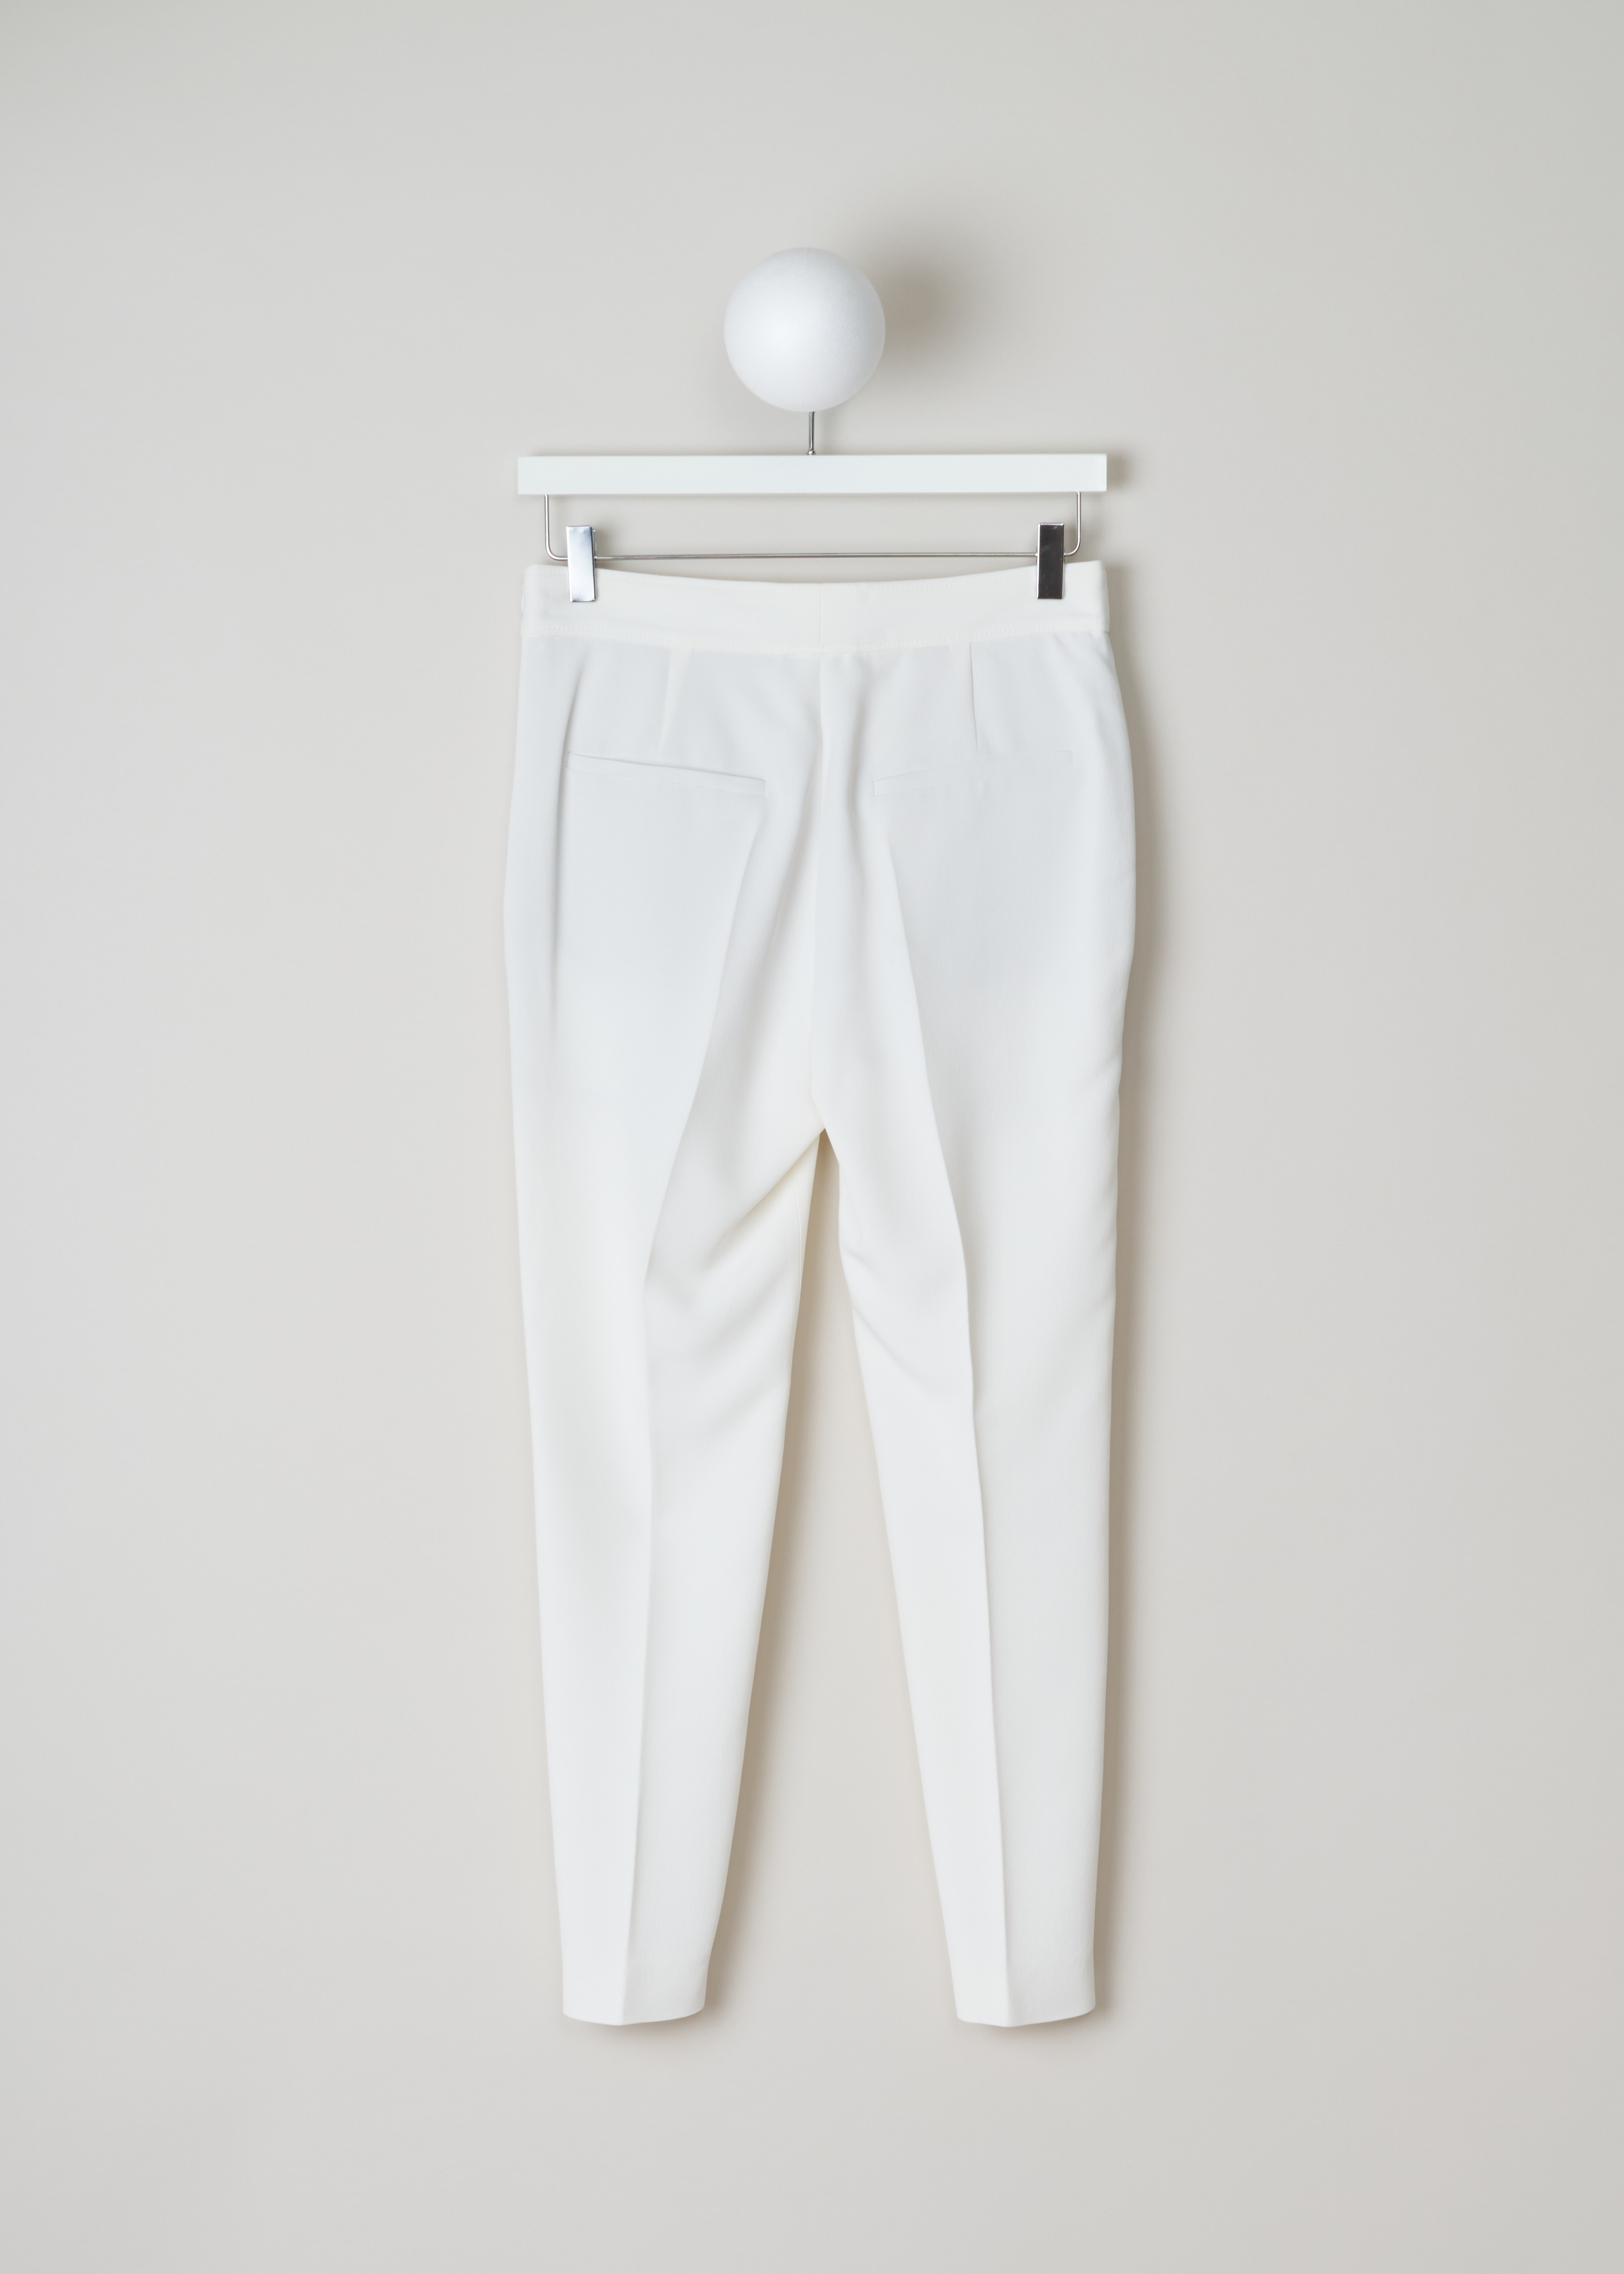 Brunello Cucinelli White trousers MA029P6301_C600 white back. White classic trousers with centre creases, side pockets and a welt pocket on the back. With an invisible zipper on the side as fastening.